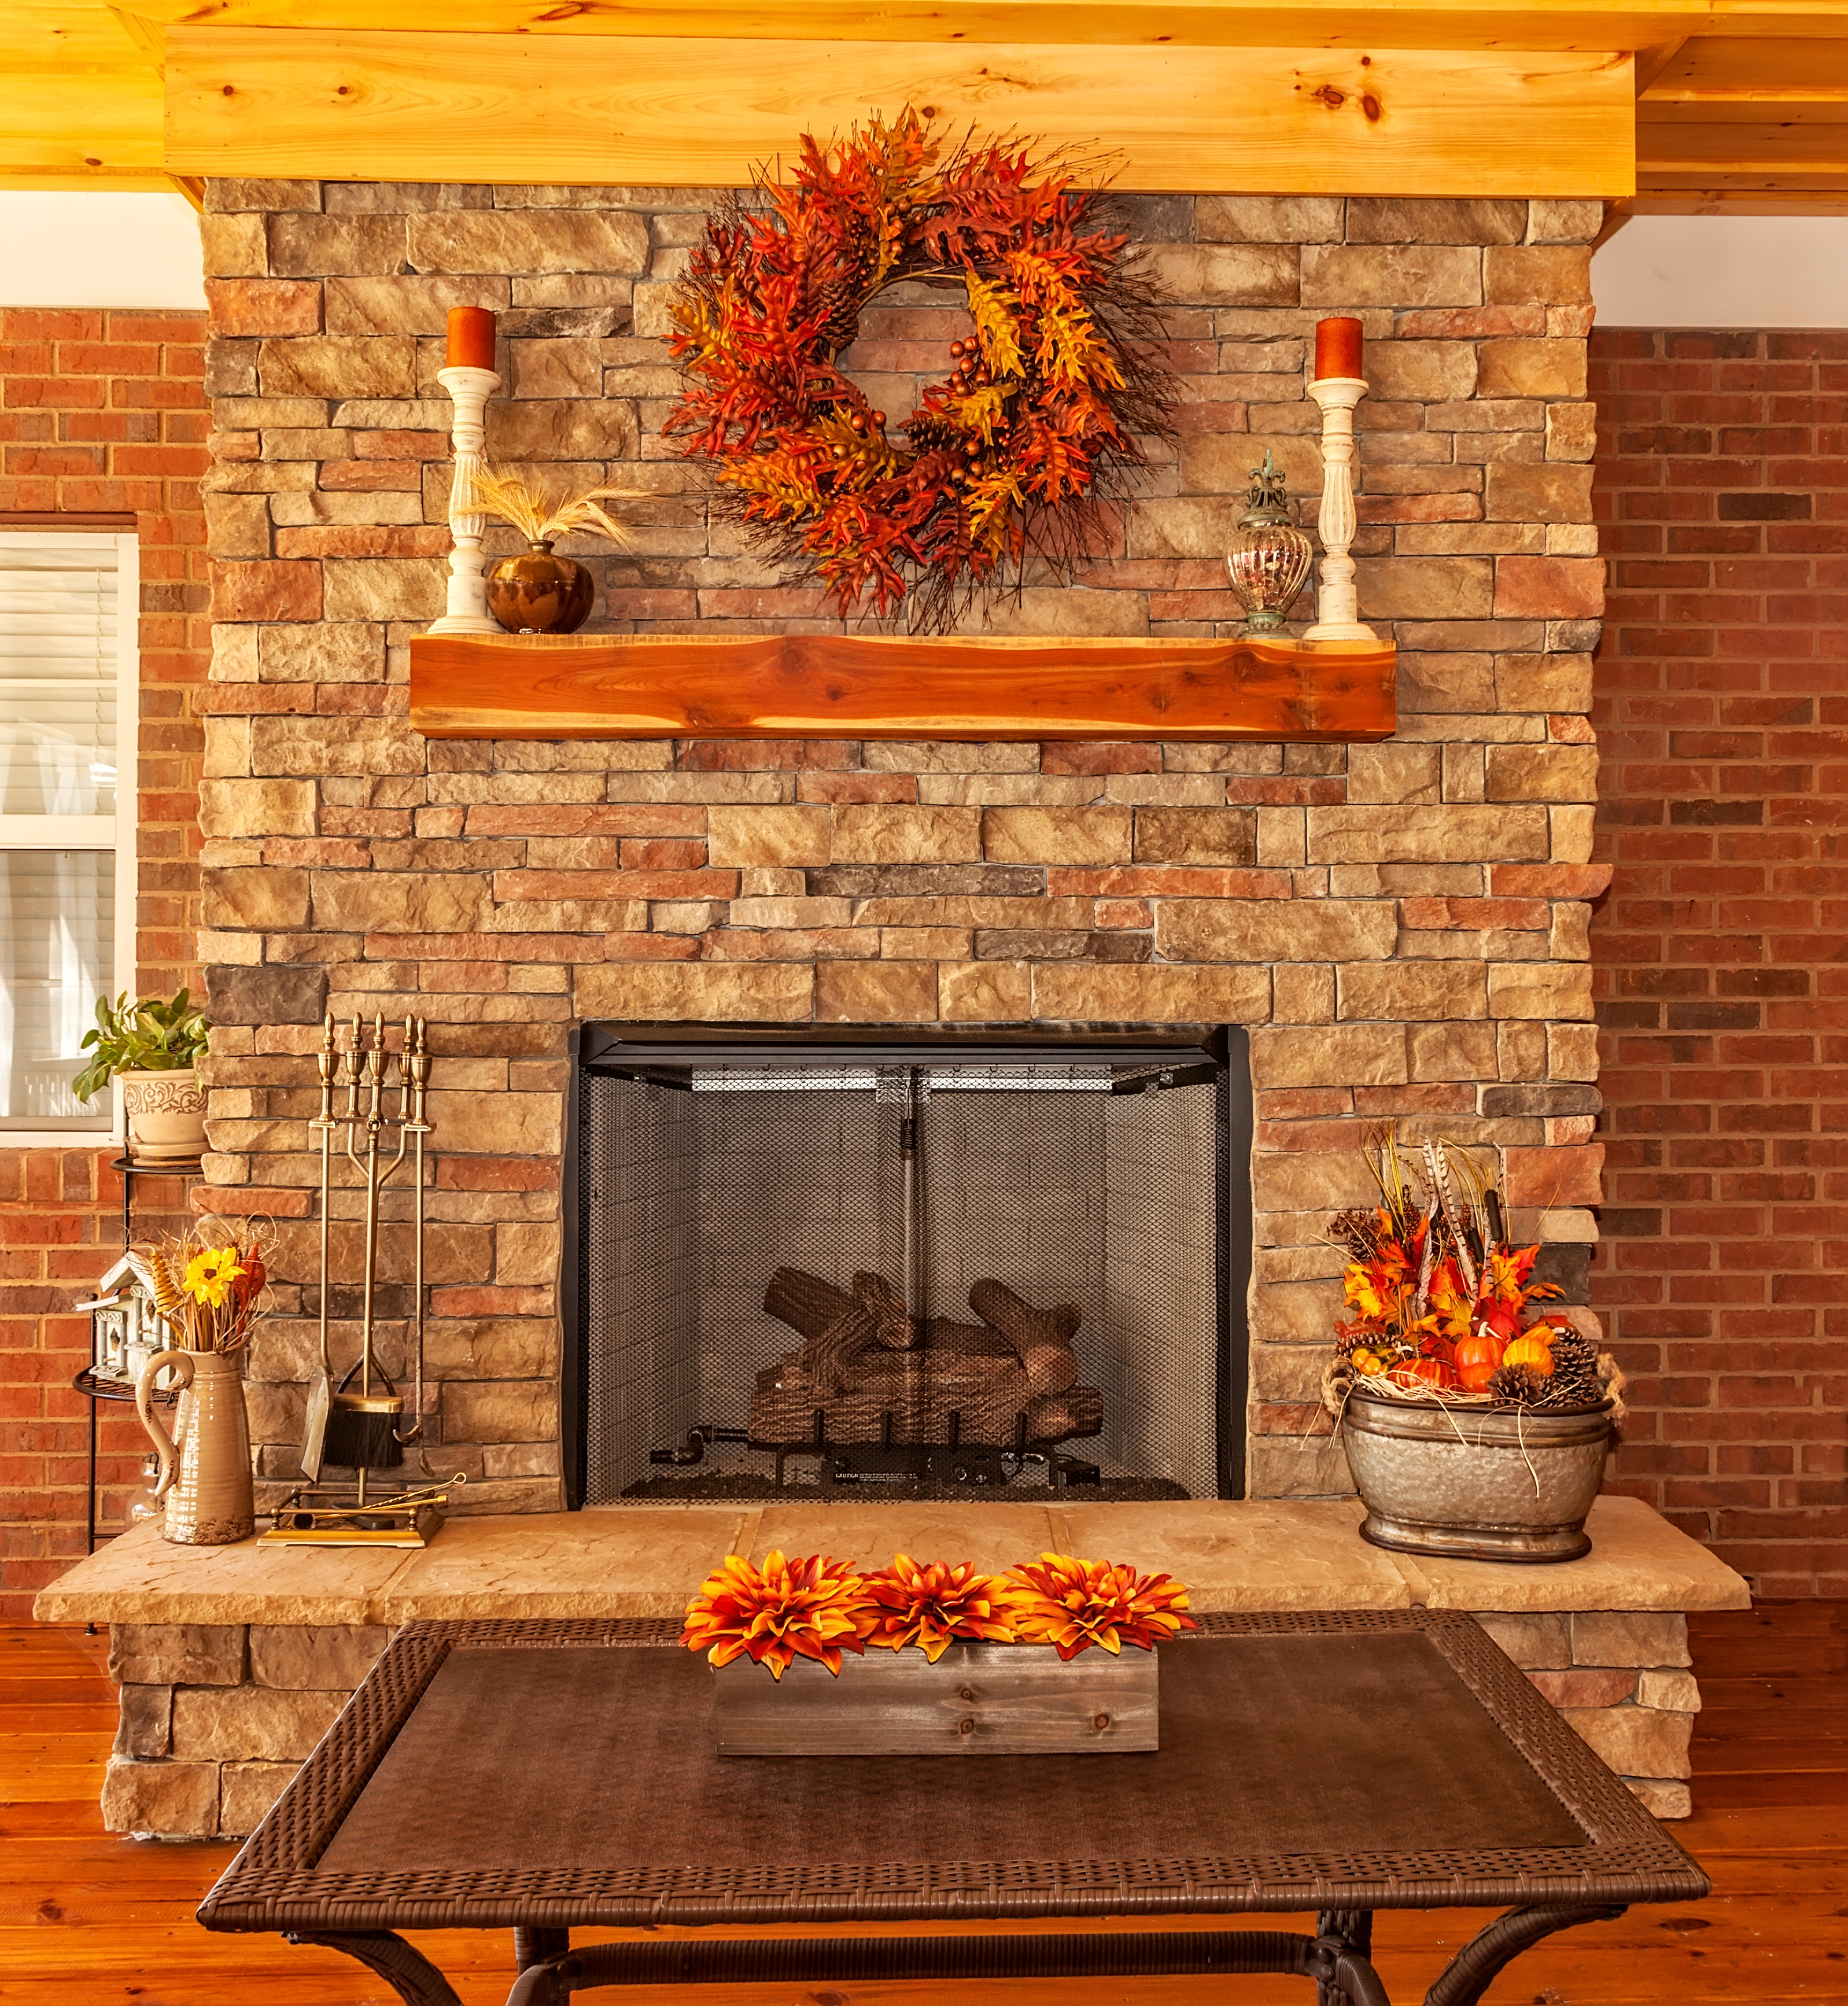 5 Fall Mantel Decorating Ideas That'll Make You Look Like a Pro 6